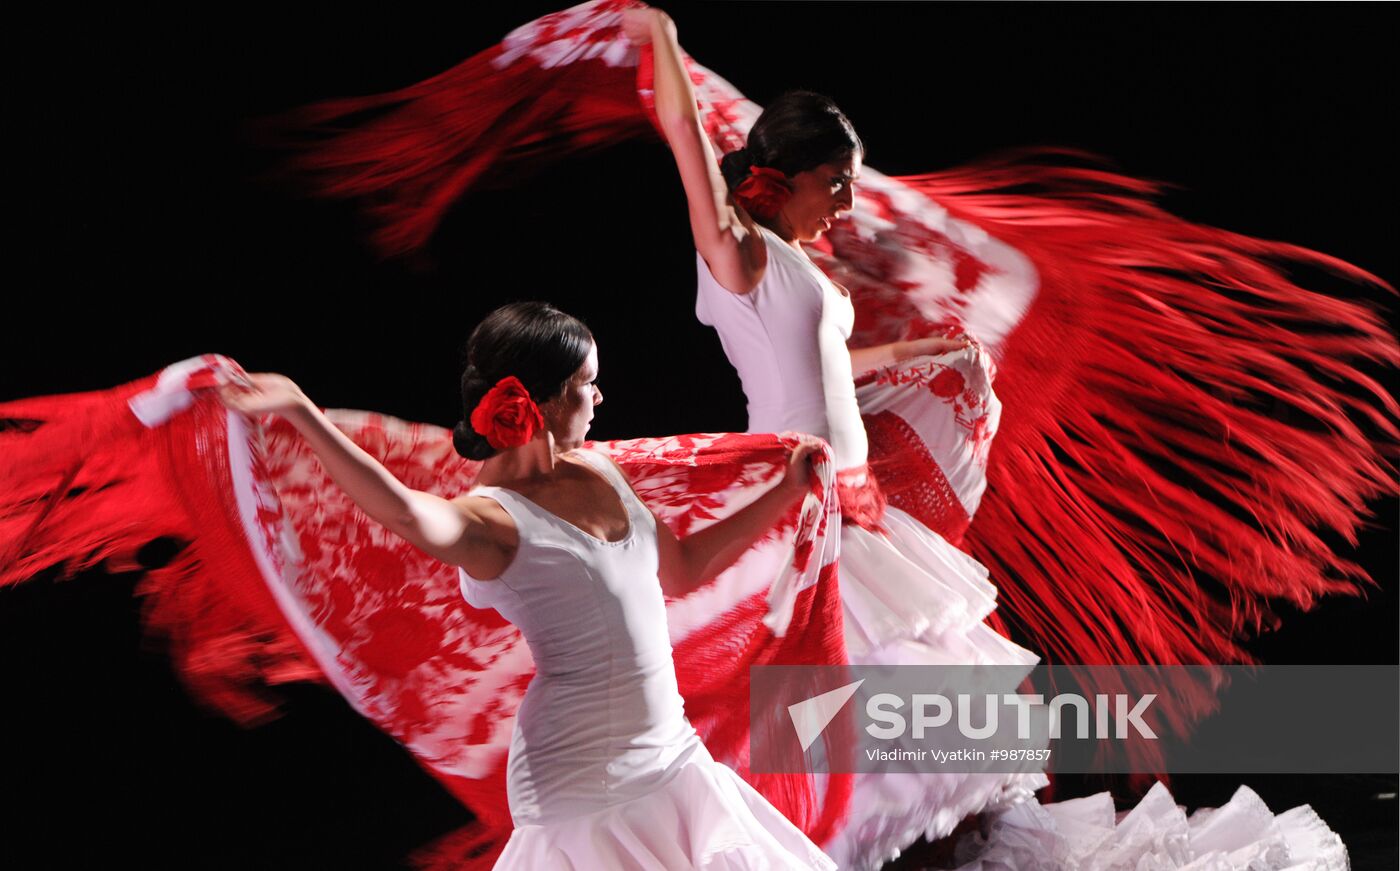 The ballet "Change of Pace" at DanceInversion 2011